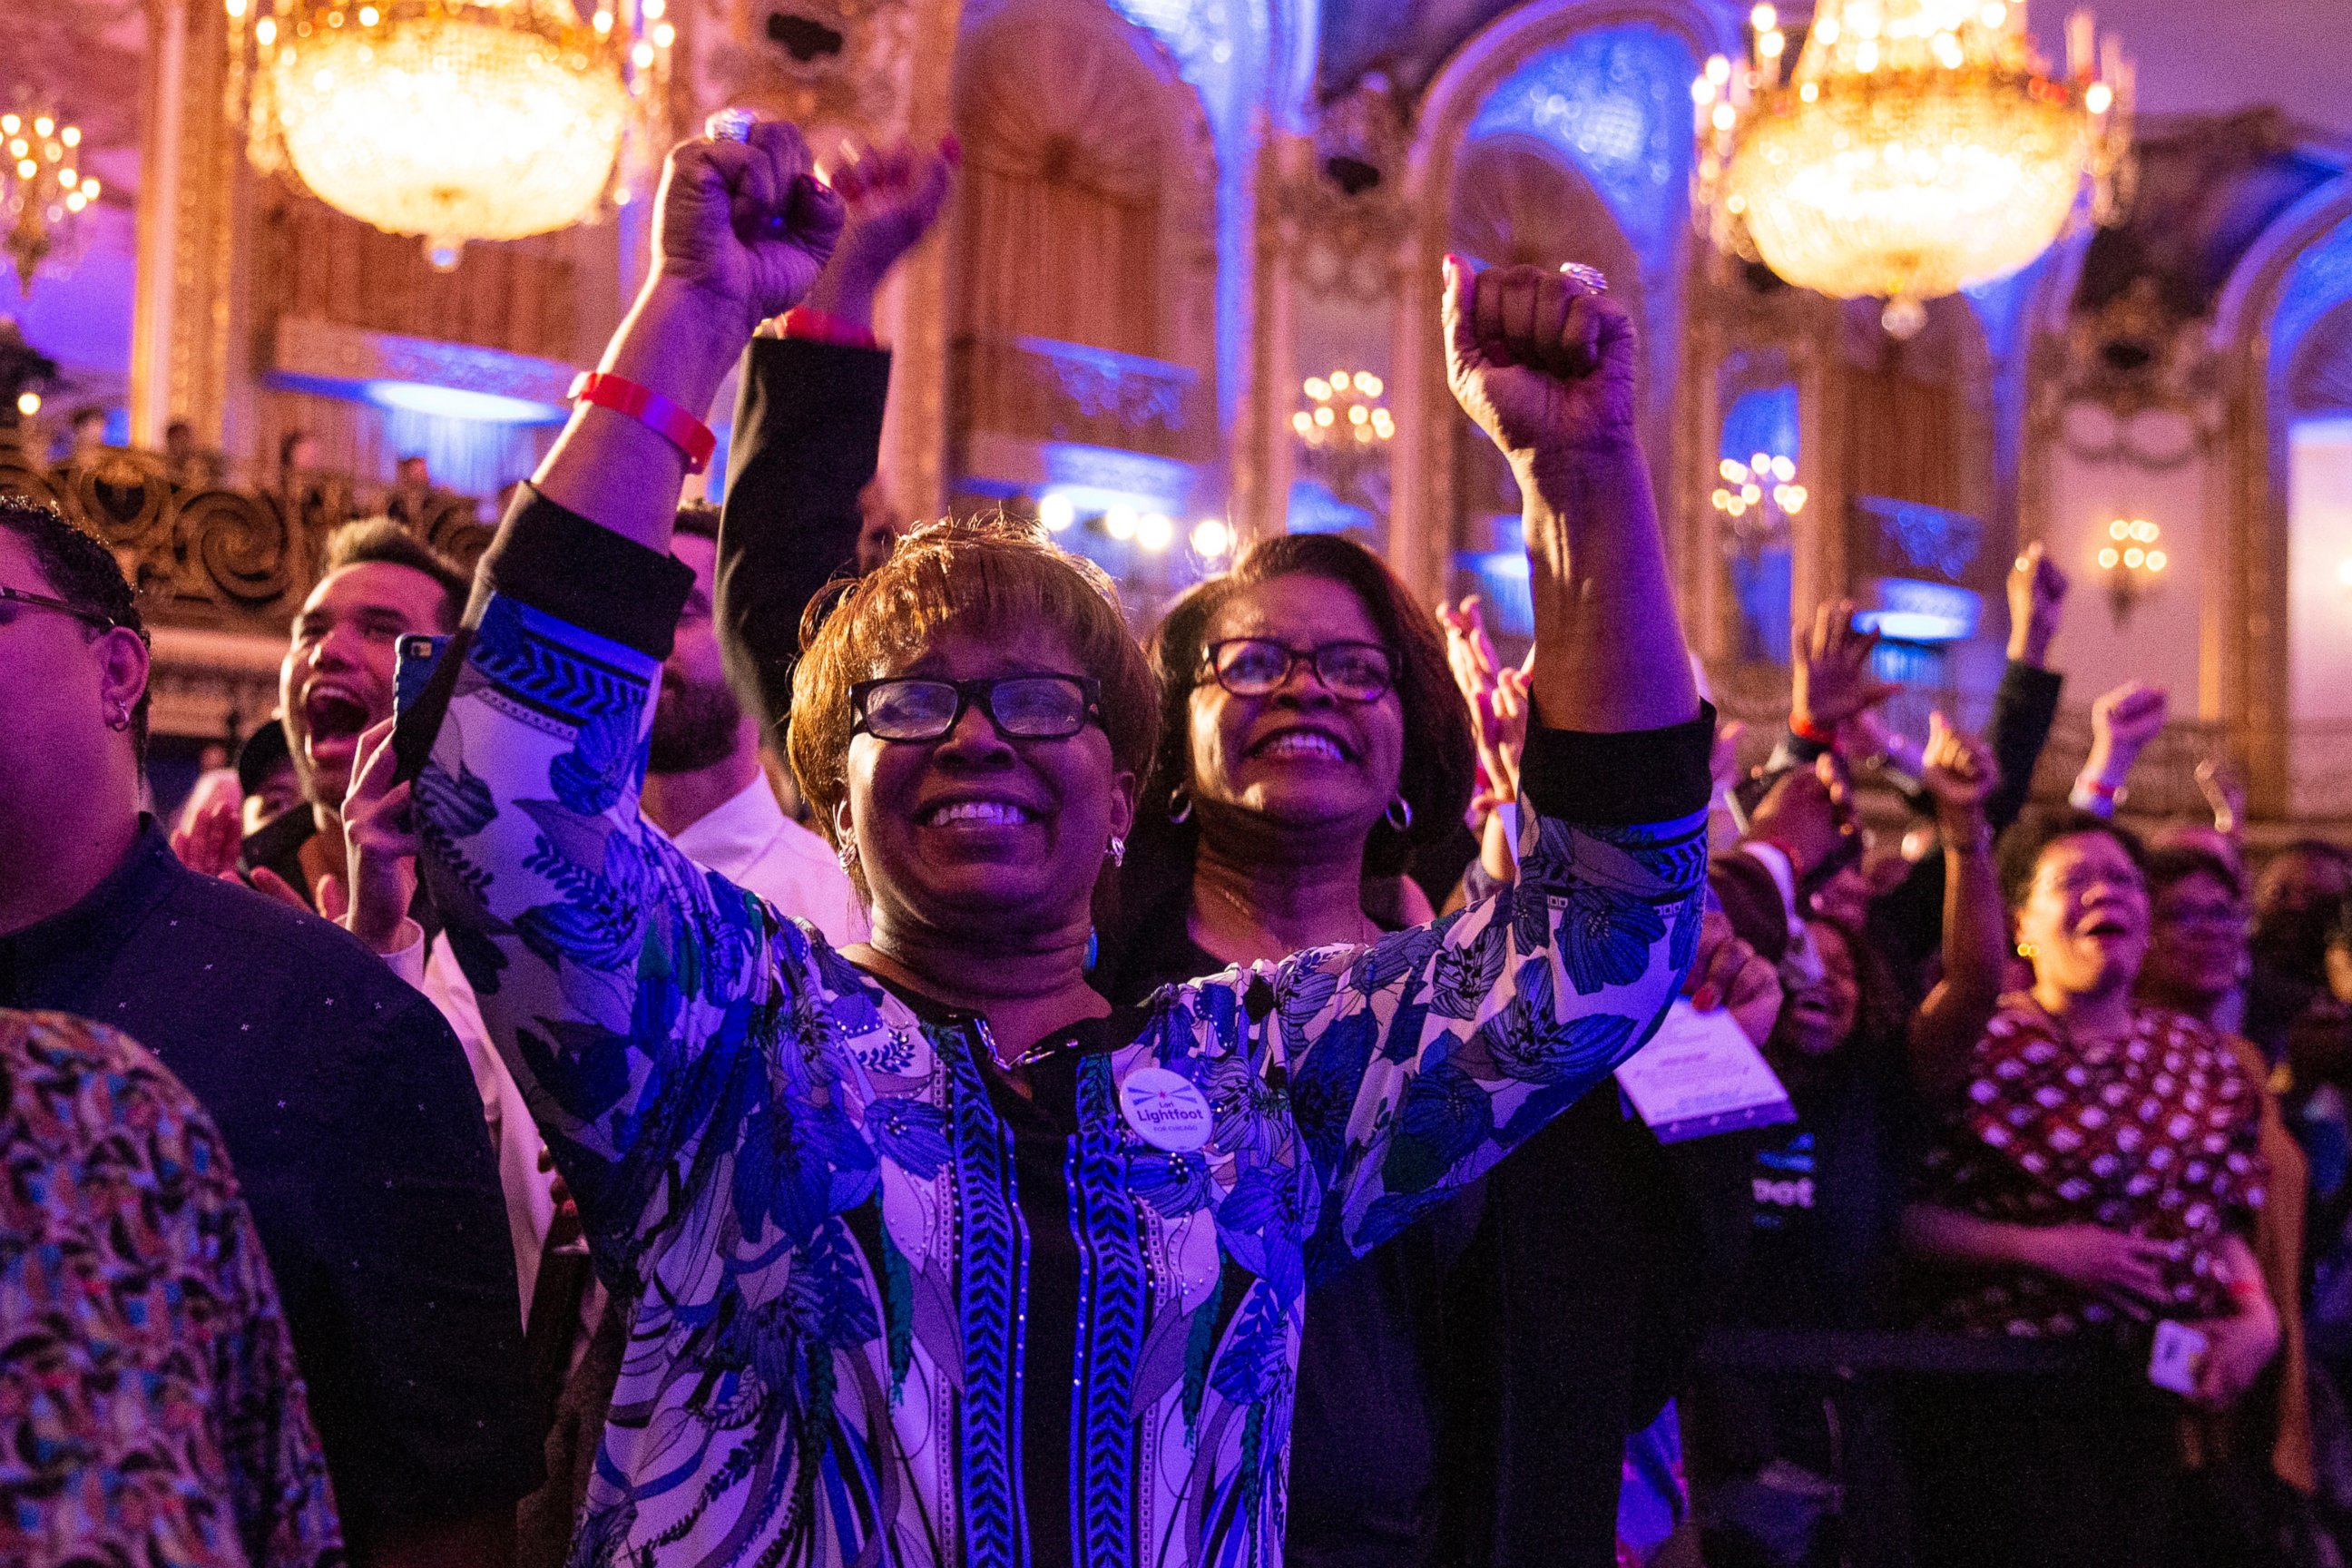 Supporters at mayoral candidate Lori Lightfoot's election night rally at the Hilton Chicago cheer as poll numbers trickle in, showing Lightfoot in the lead against Toni Preckwinkle in the Chicago mayoral election, Tuesday, April 2, 2019. (Ashlee Rezi